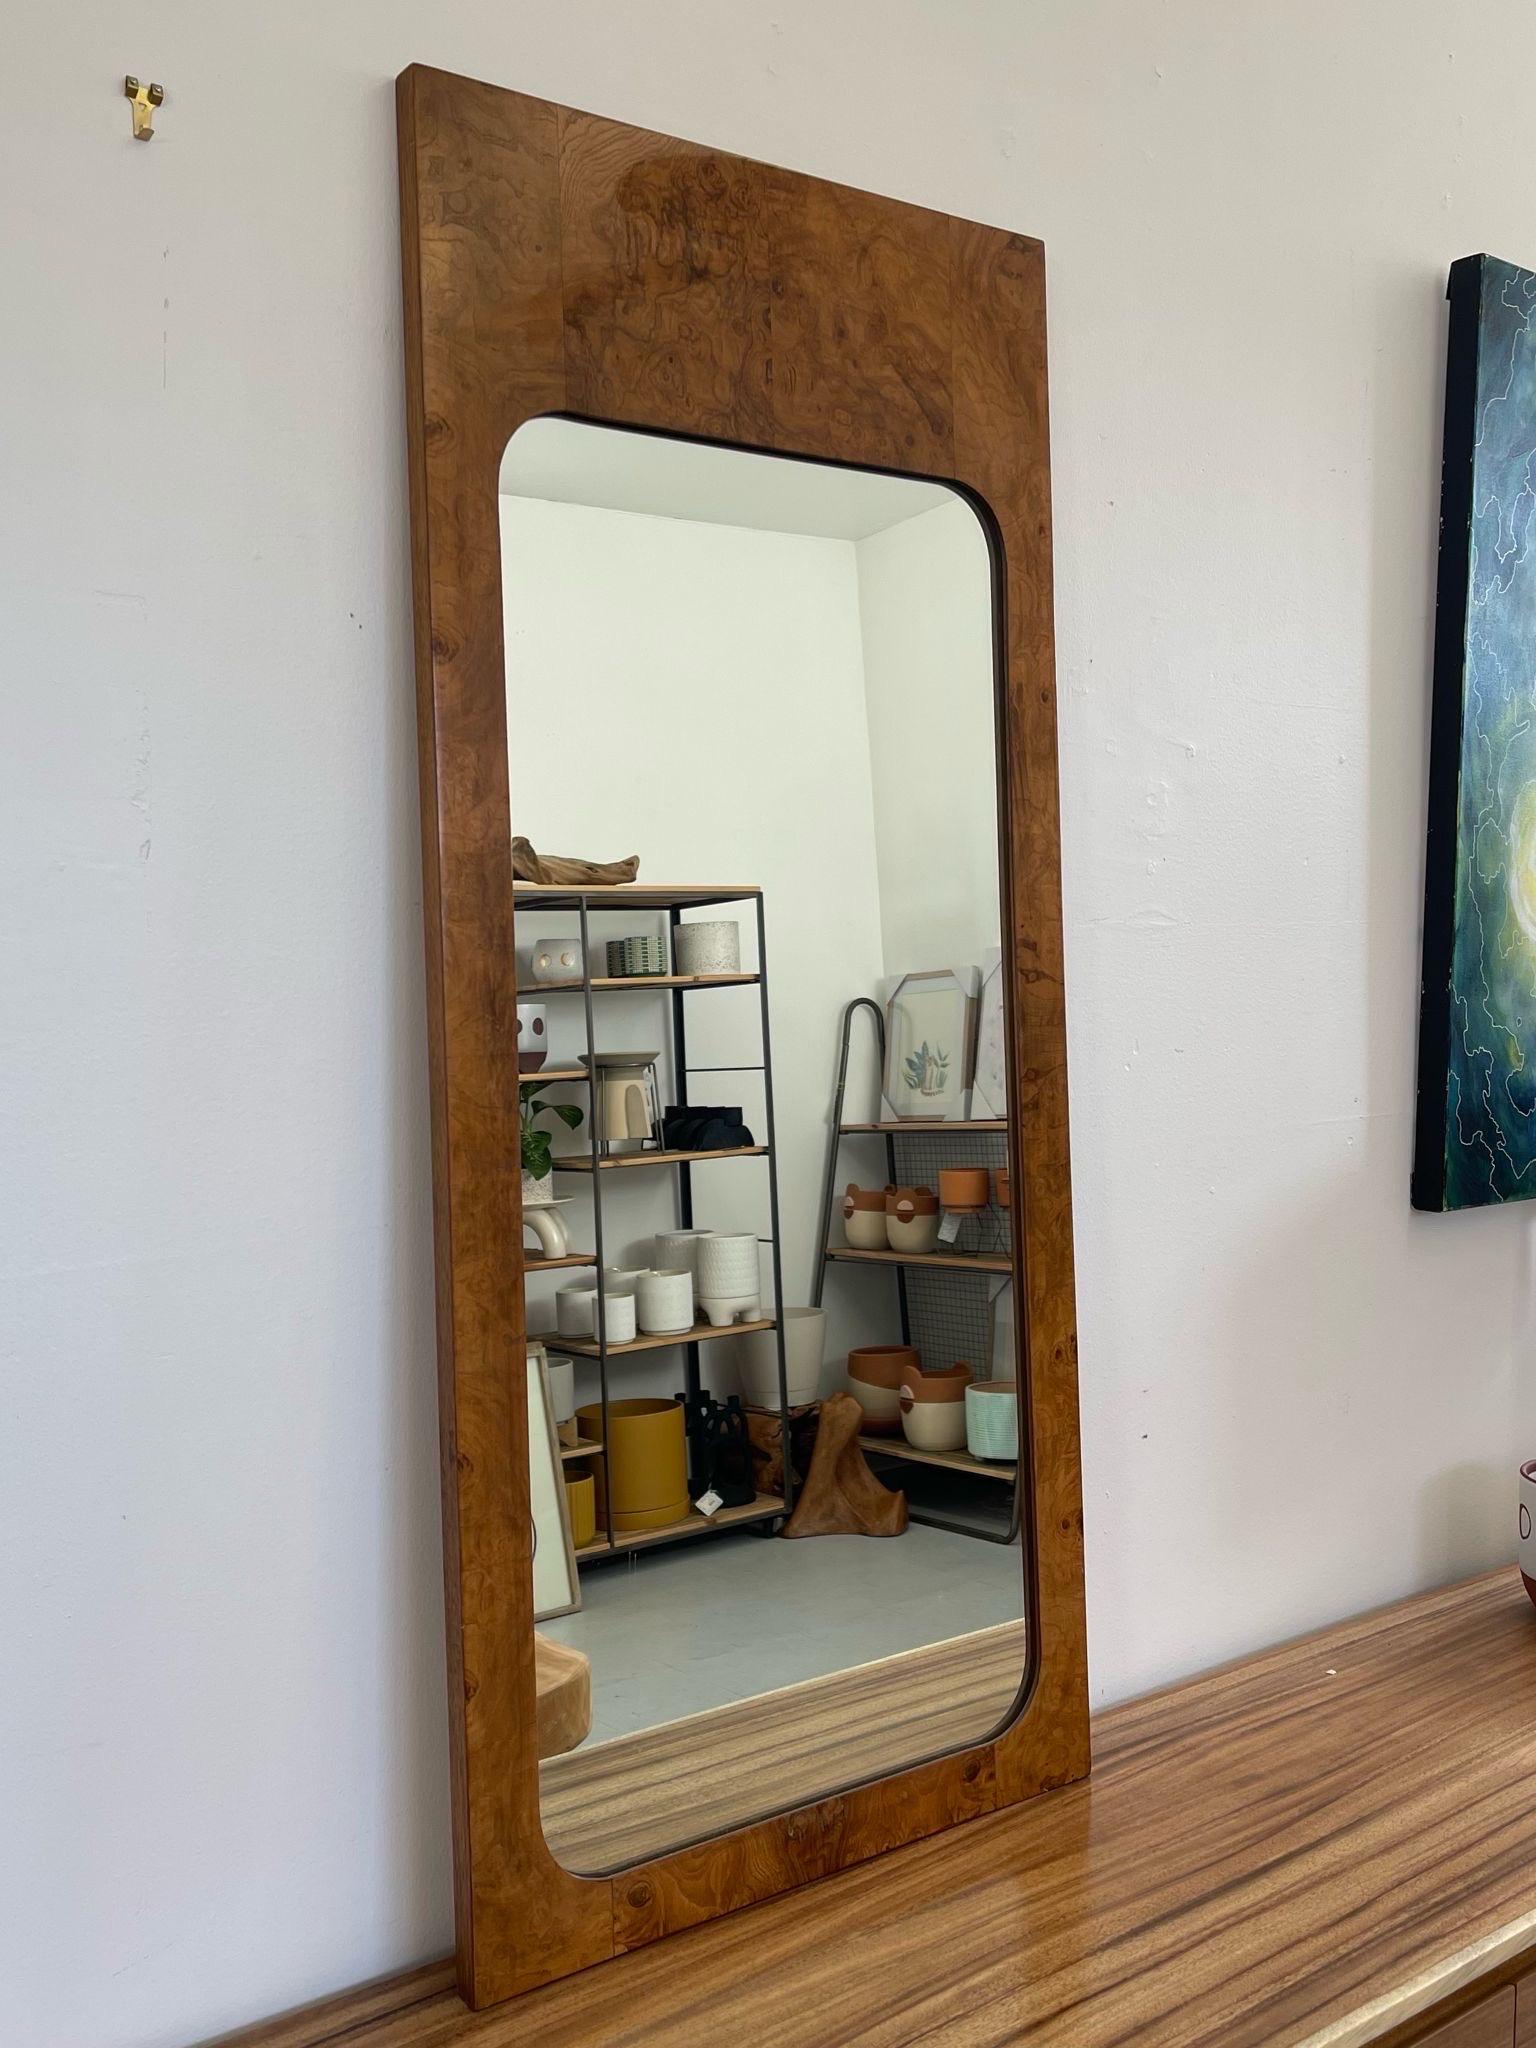 Mid Century Modern wall Mirror. Circa 1970. Produced by Lane Furniture as part of their “Alpha” Collection. 
First of Two available. Vintage Condition Consistent with Age as Pictured.

Dimensions. 21 1/4 W ; 1 D ; 47 H